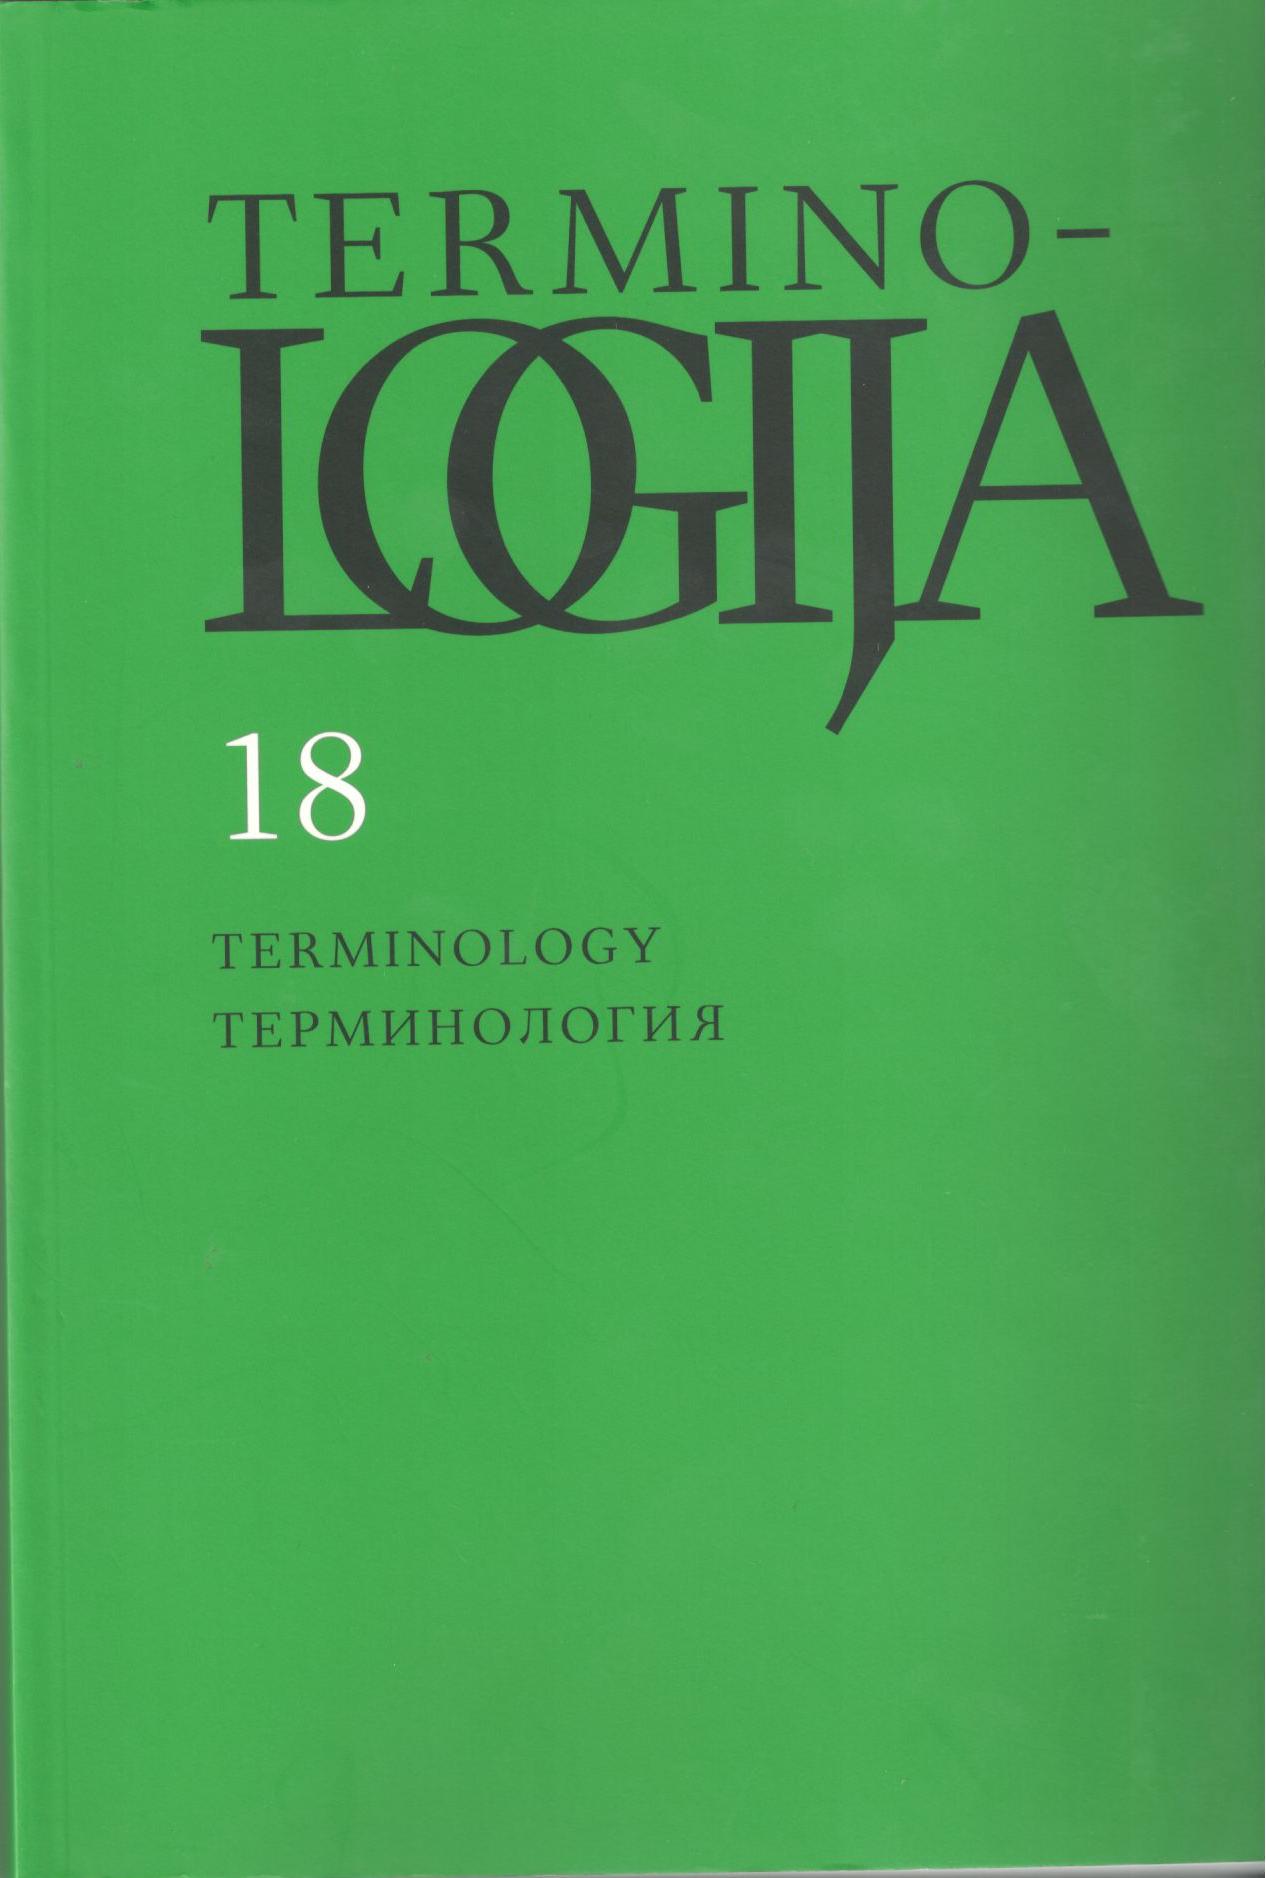 Terminological methods in the history of terminology science